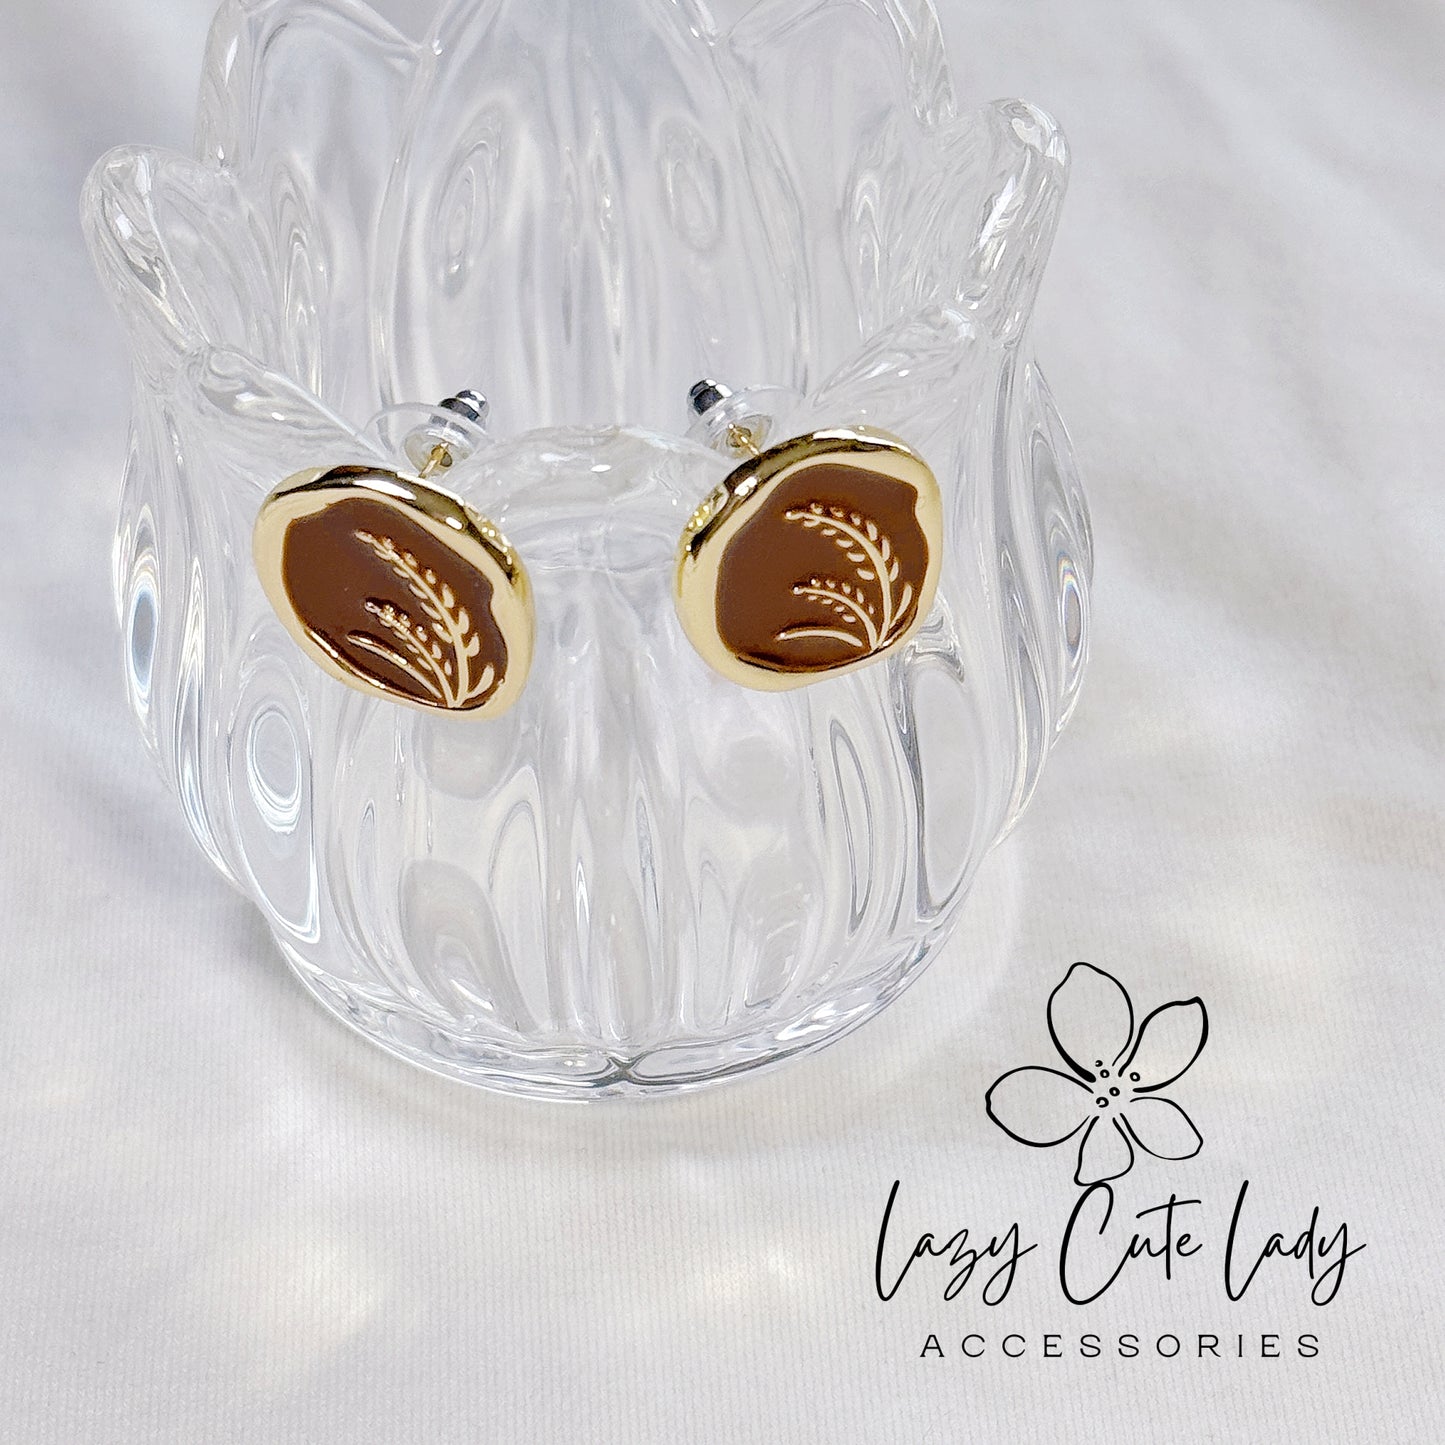 Vintage Wheat-themed Earrings in Gold, Available in Brown and Deep Red Variants